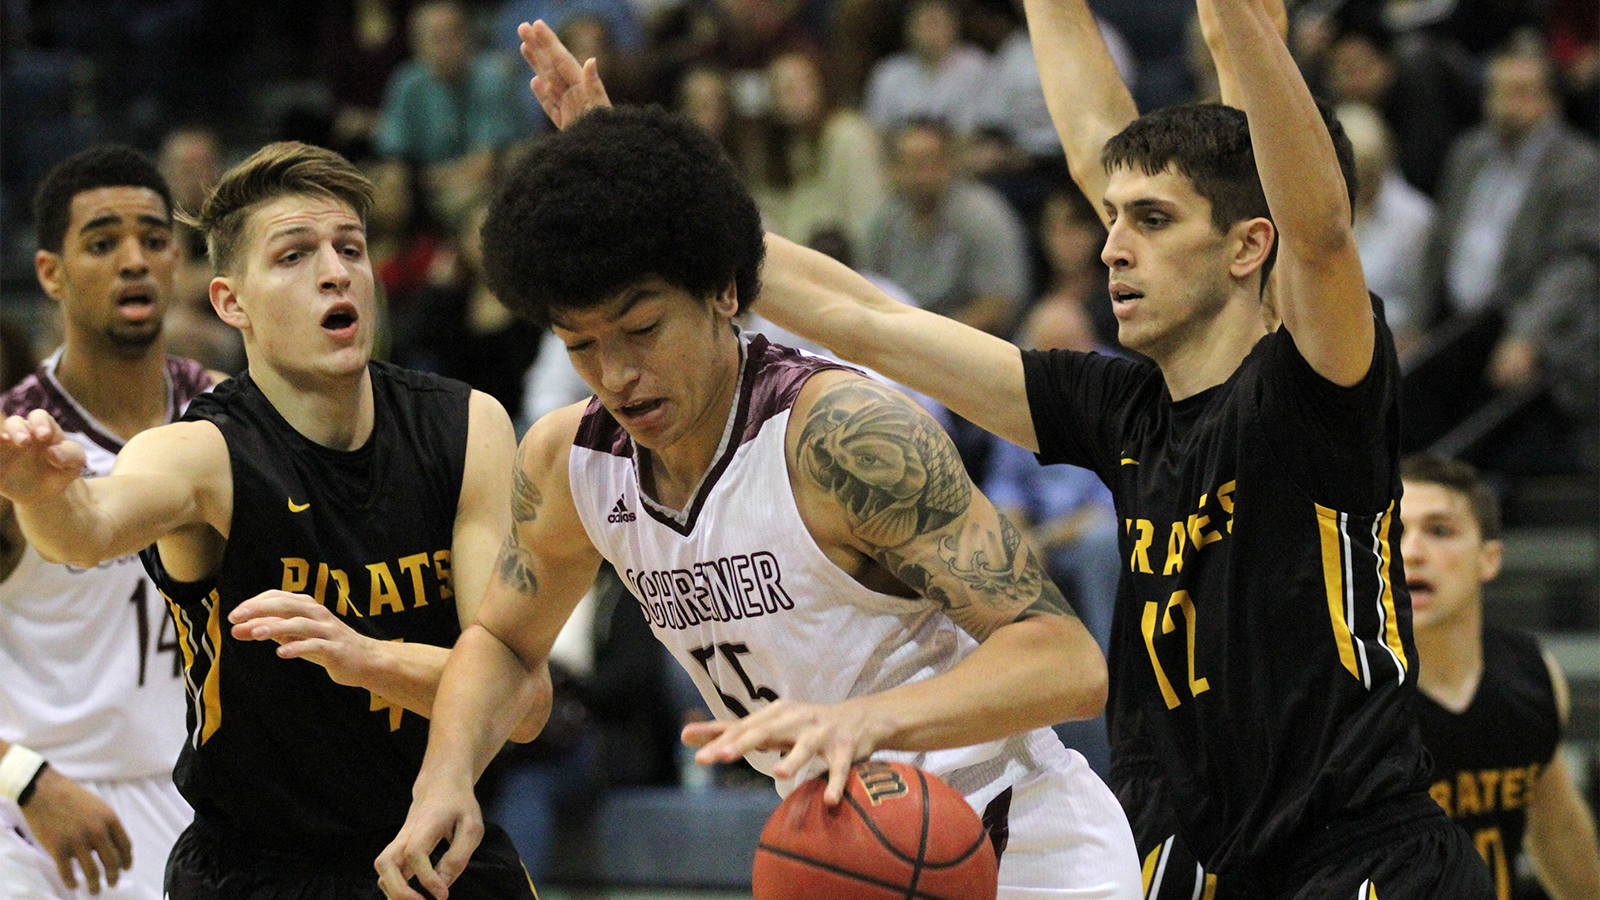 Pirates fall in semifinals to top-seeded Schreiner, 82-76